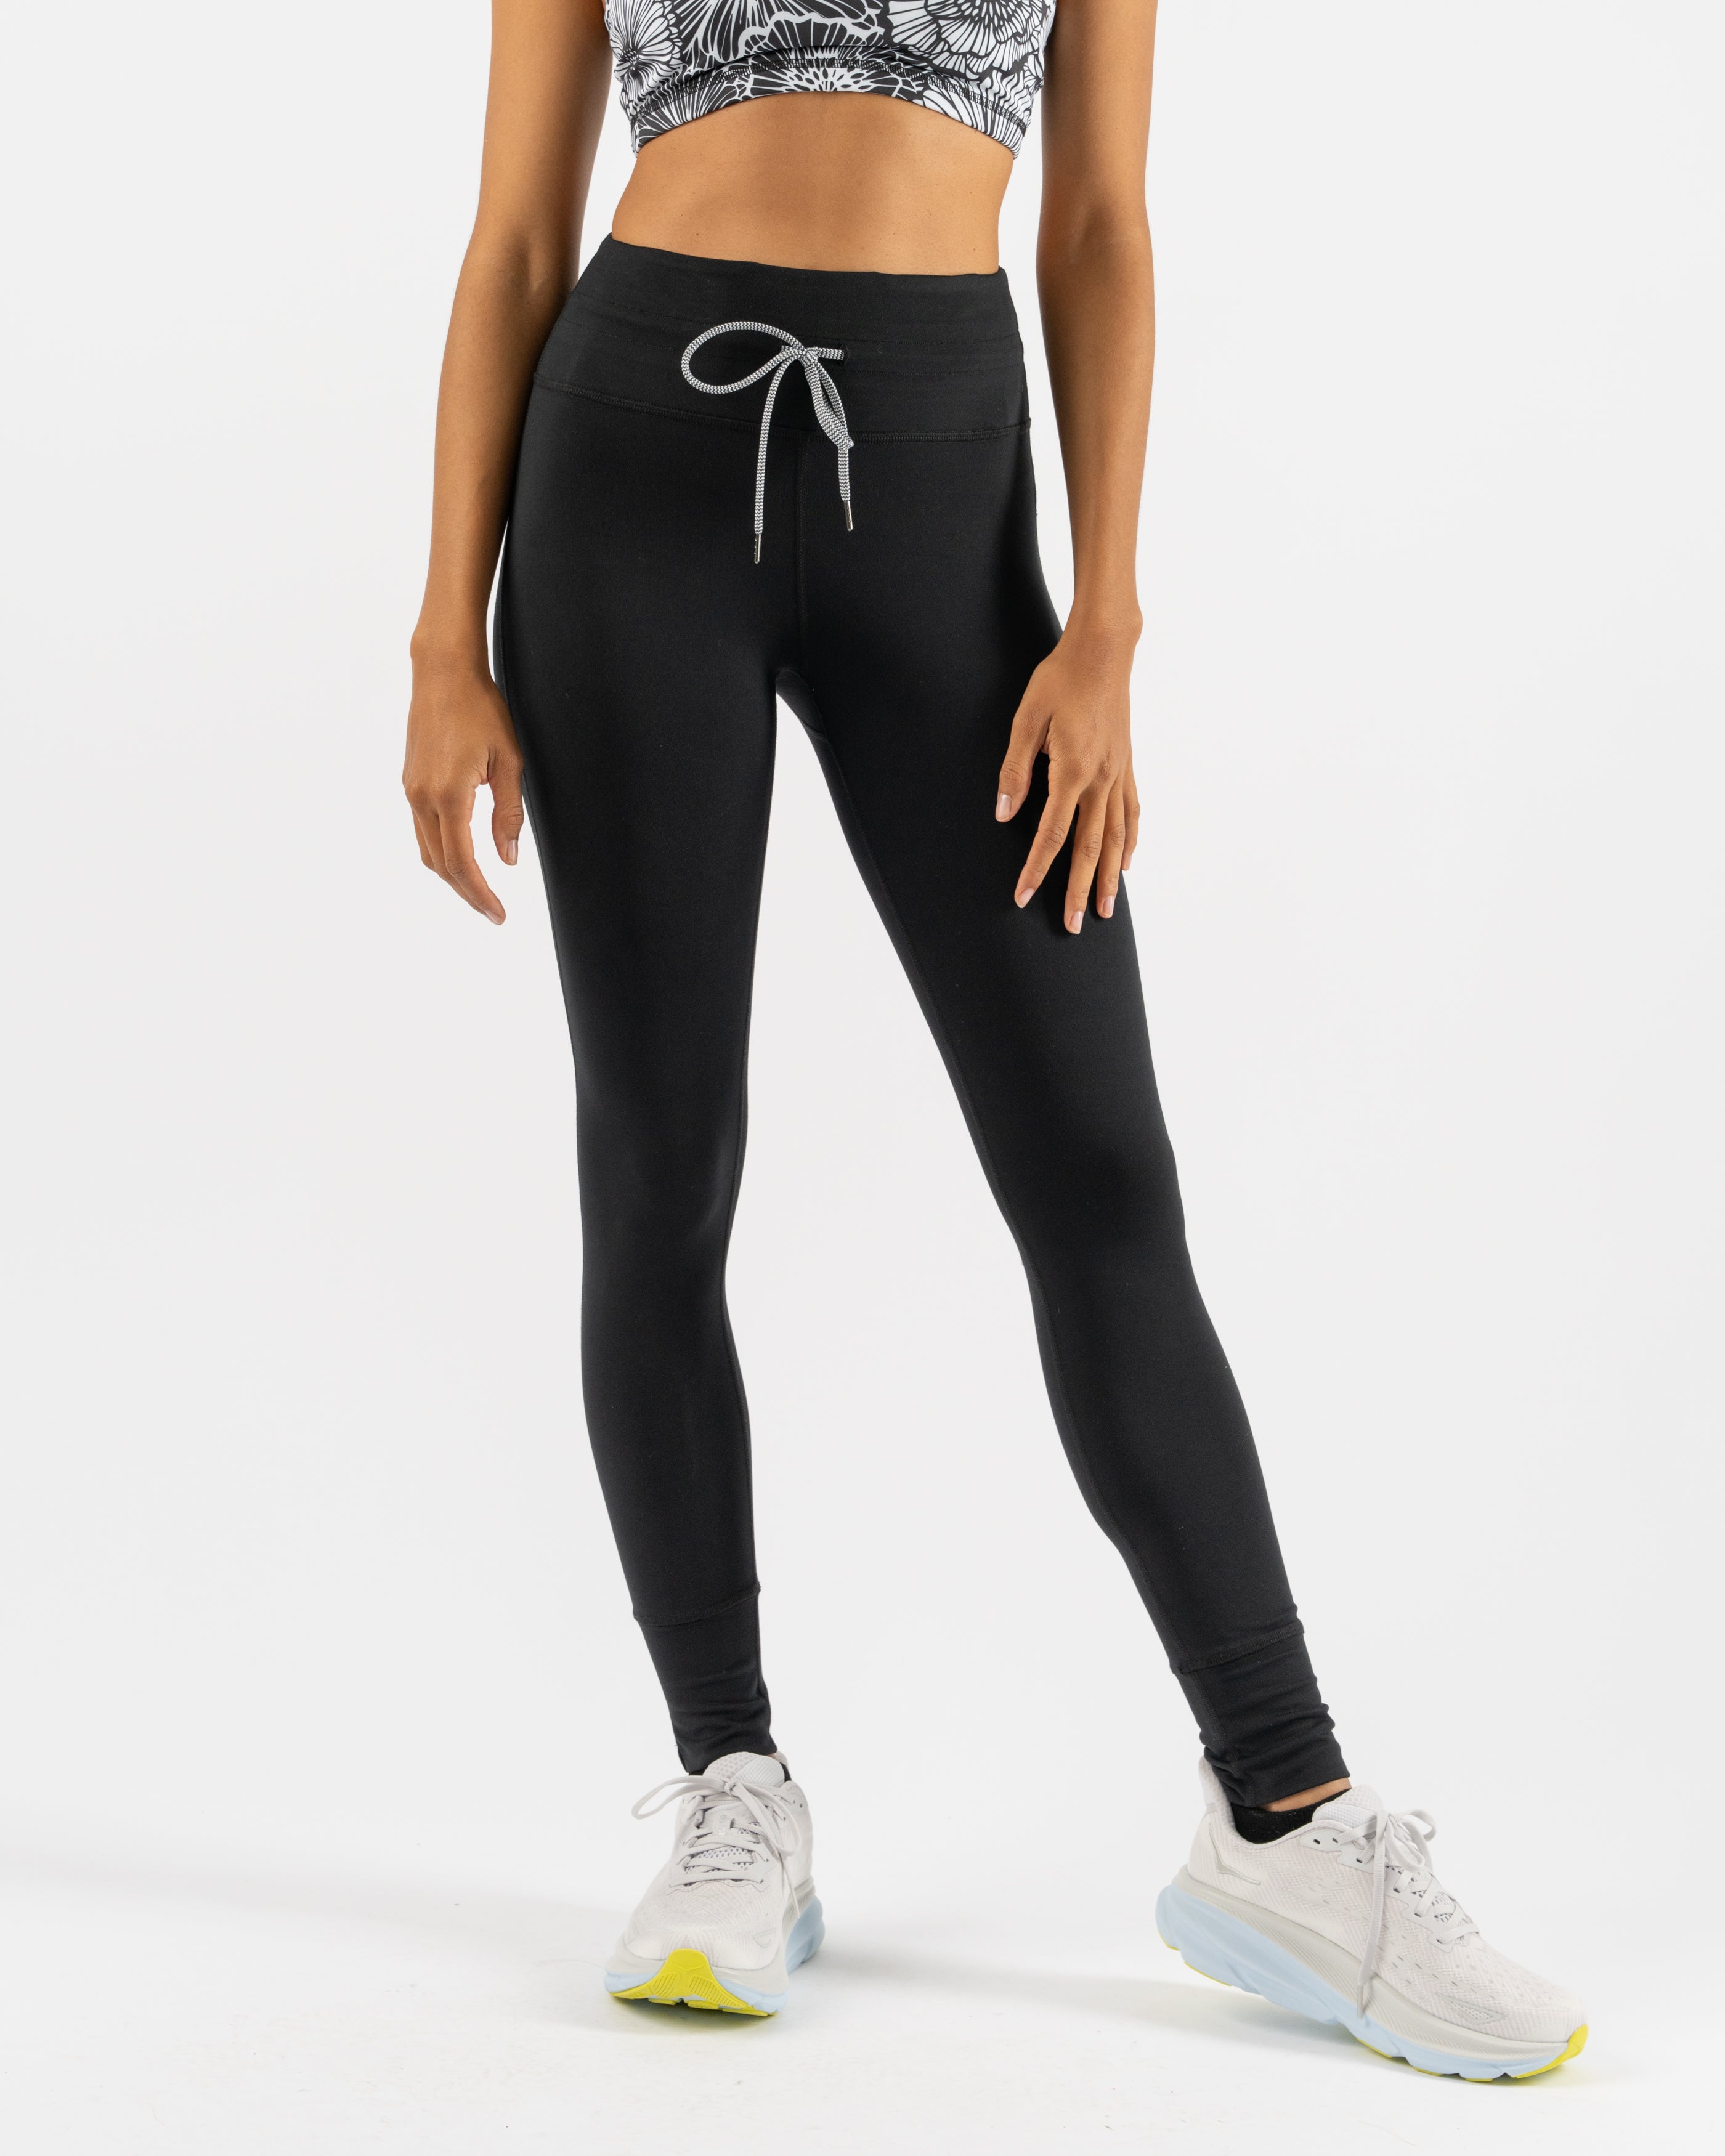 New ALONG FIT High Waisted Leggings for Women, Anti-Nail Yoga